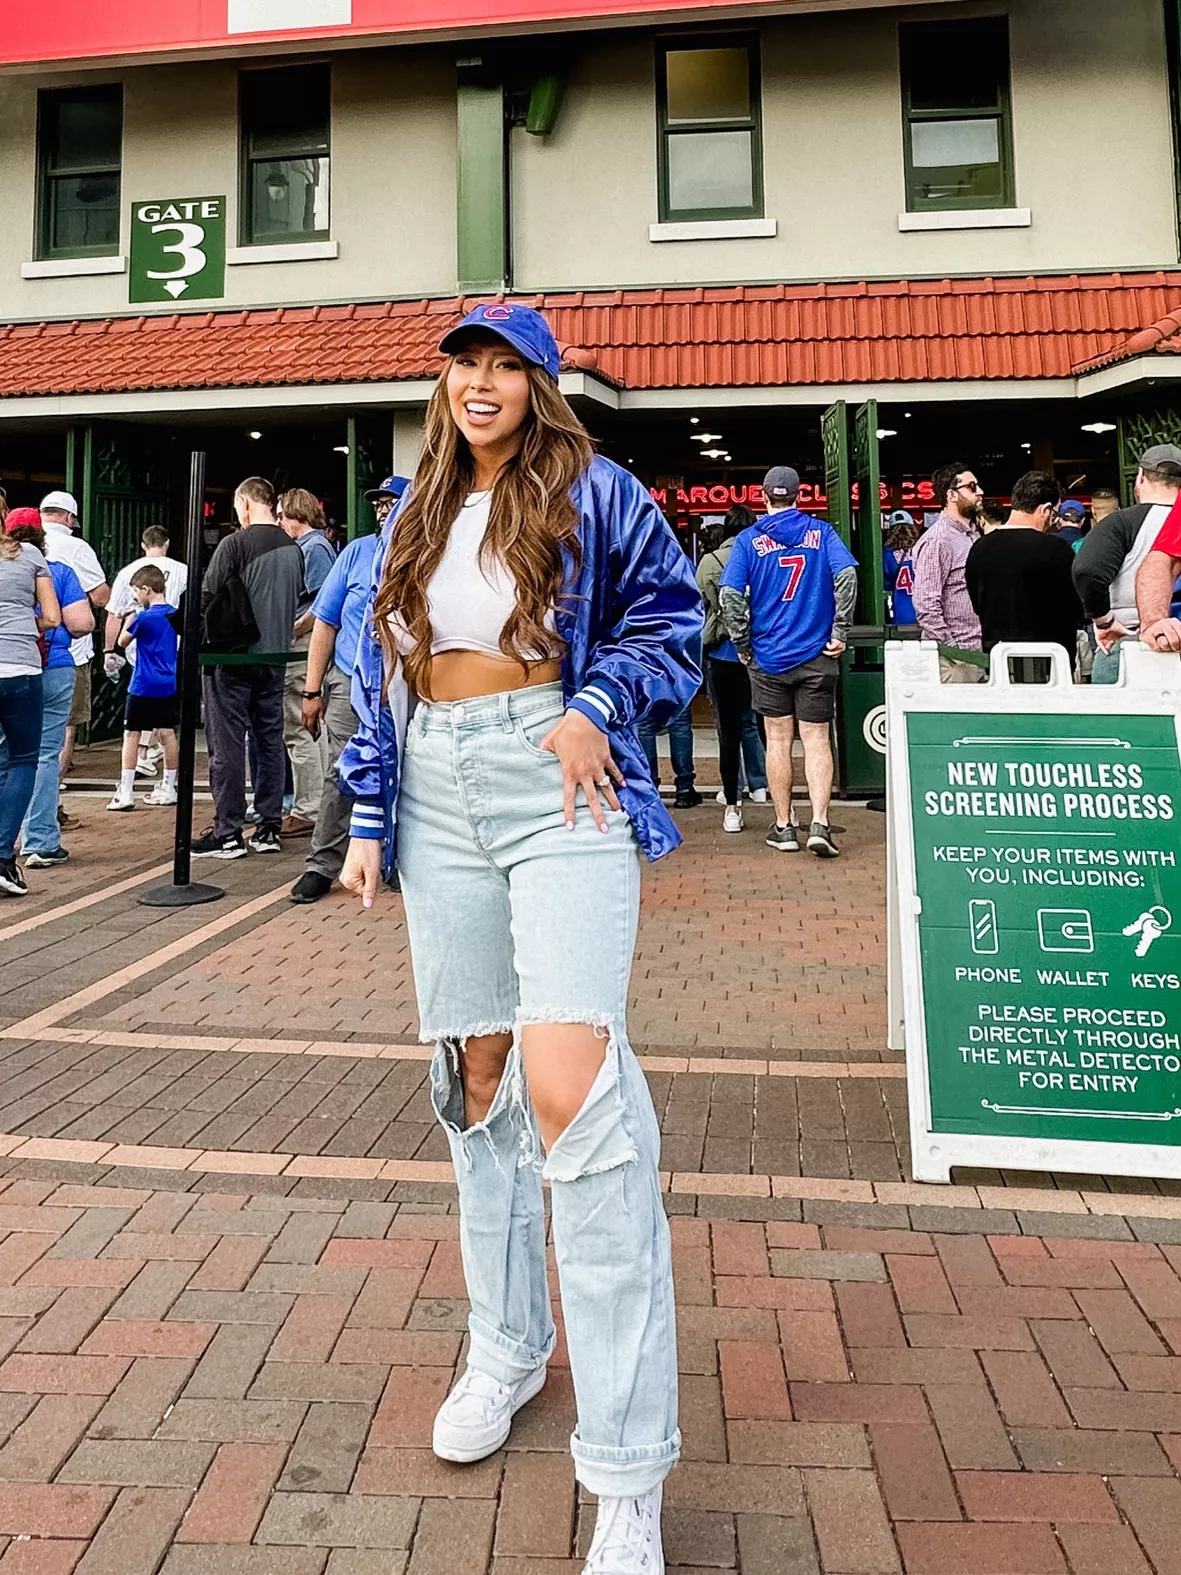 Baseball Game Outfit  Baseball outfit, Baseball game outfits, Gameday  outfit